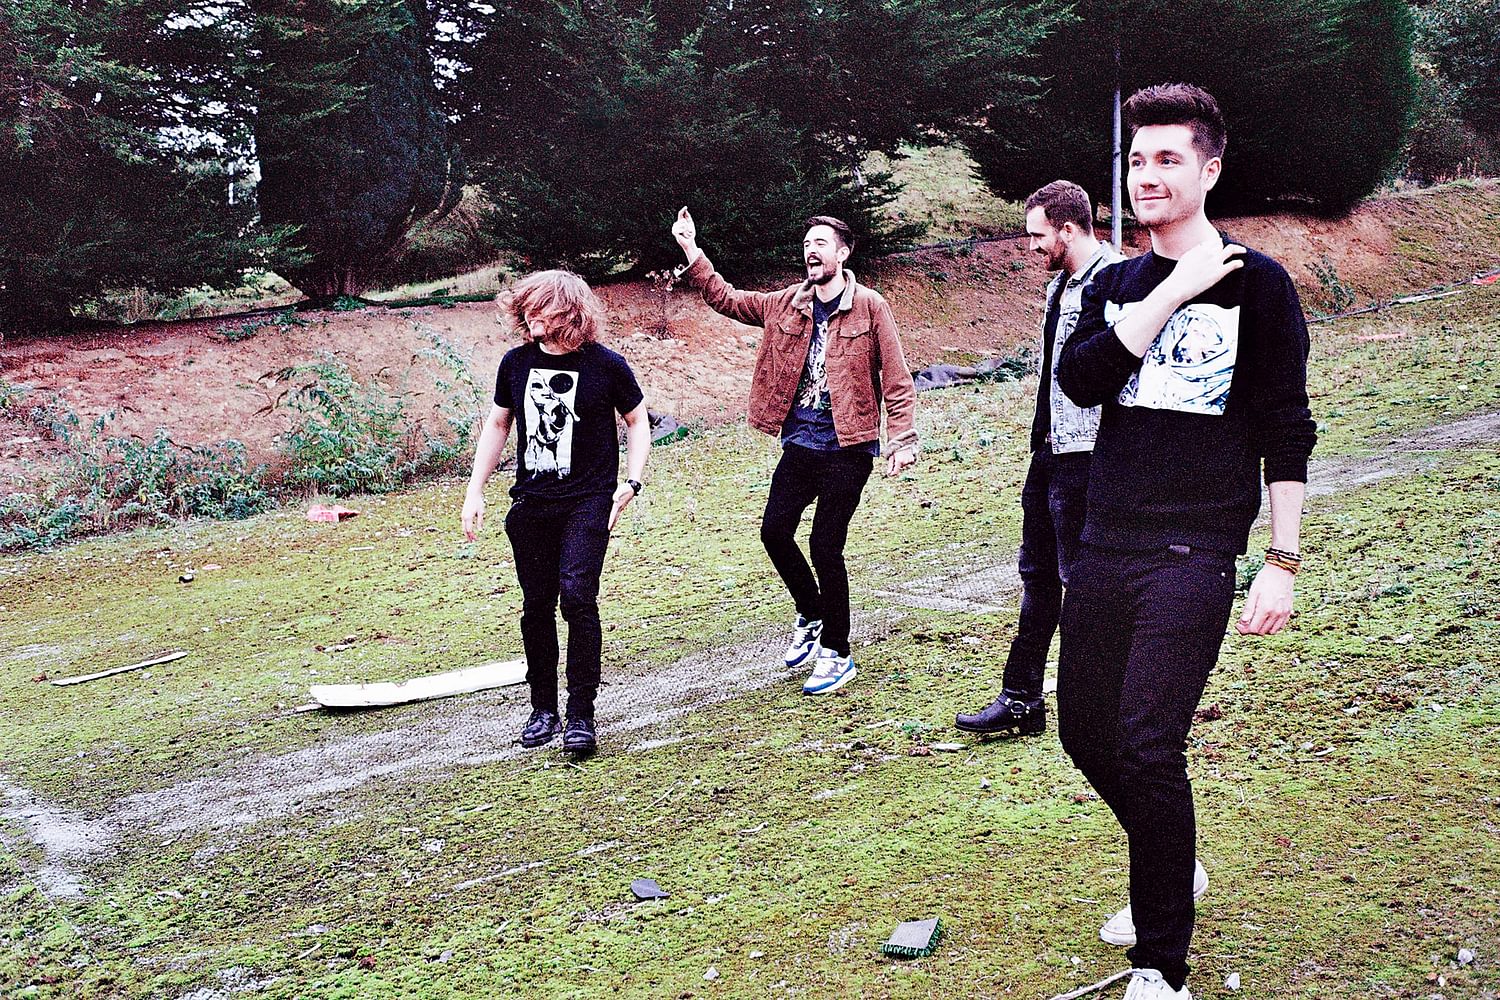 Bastille announce new mixtape with Haim, MNEK, Angel Haze, unveil track 'Torn Apart' feat. Grades and Lizzo